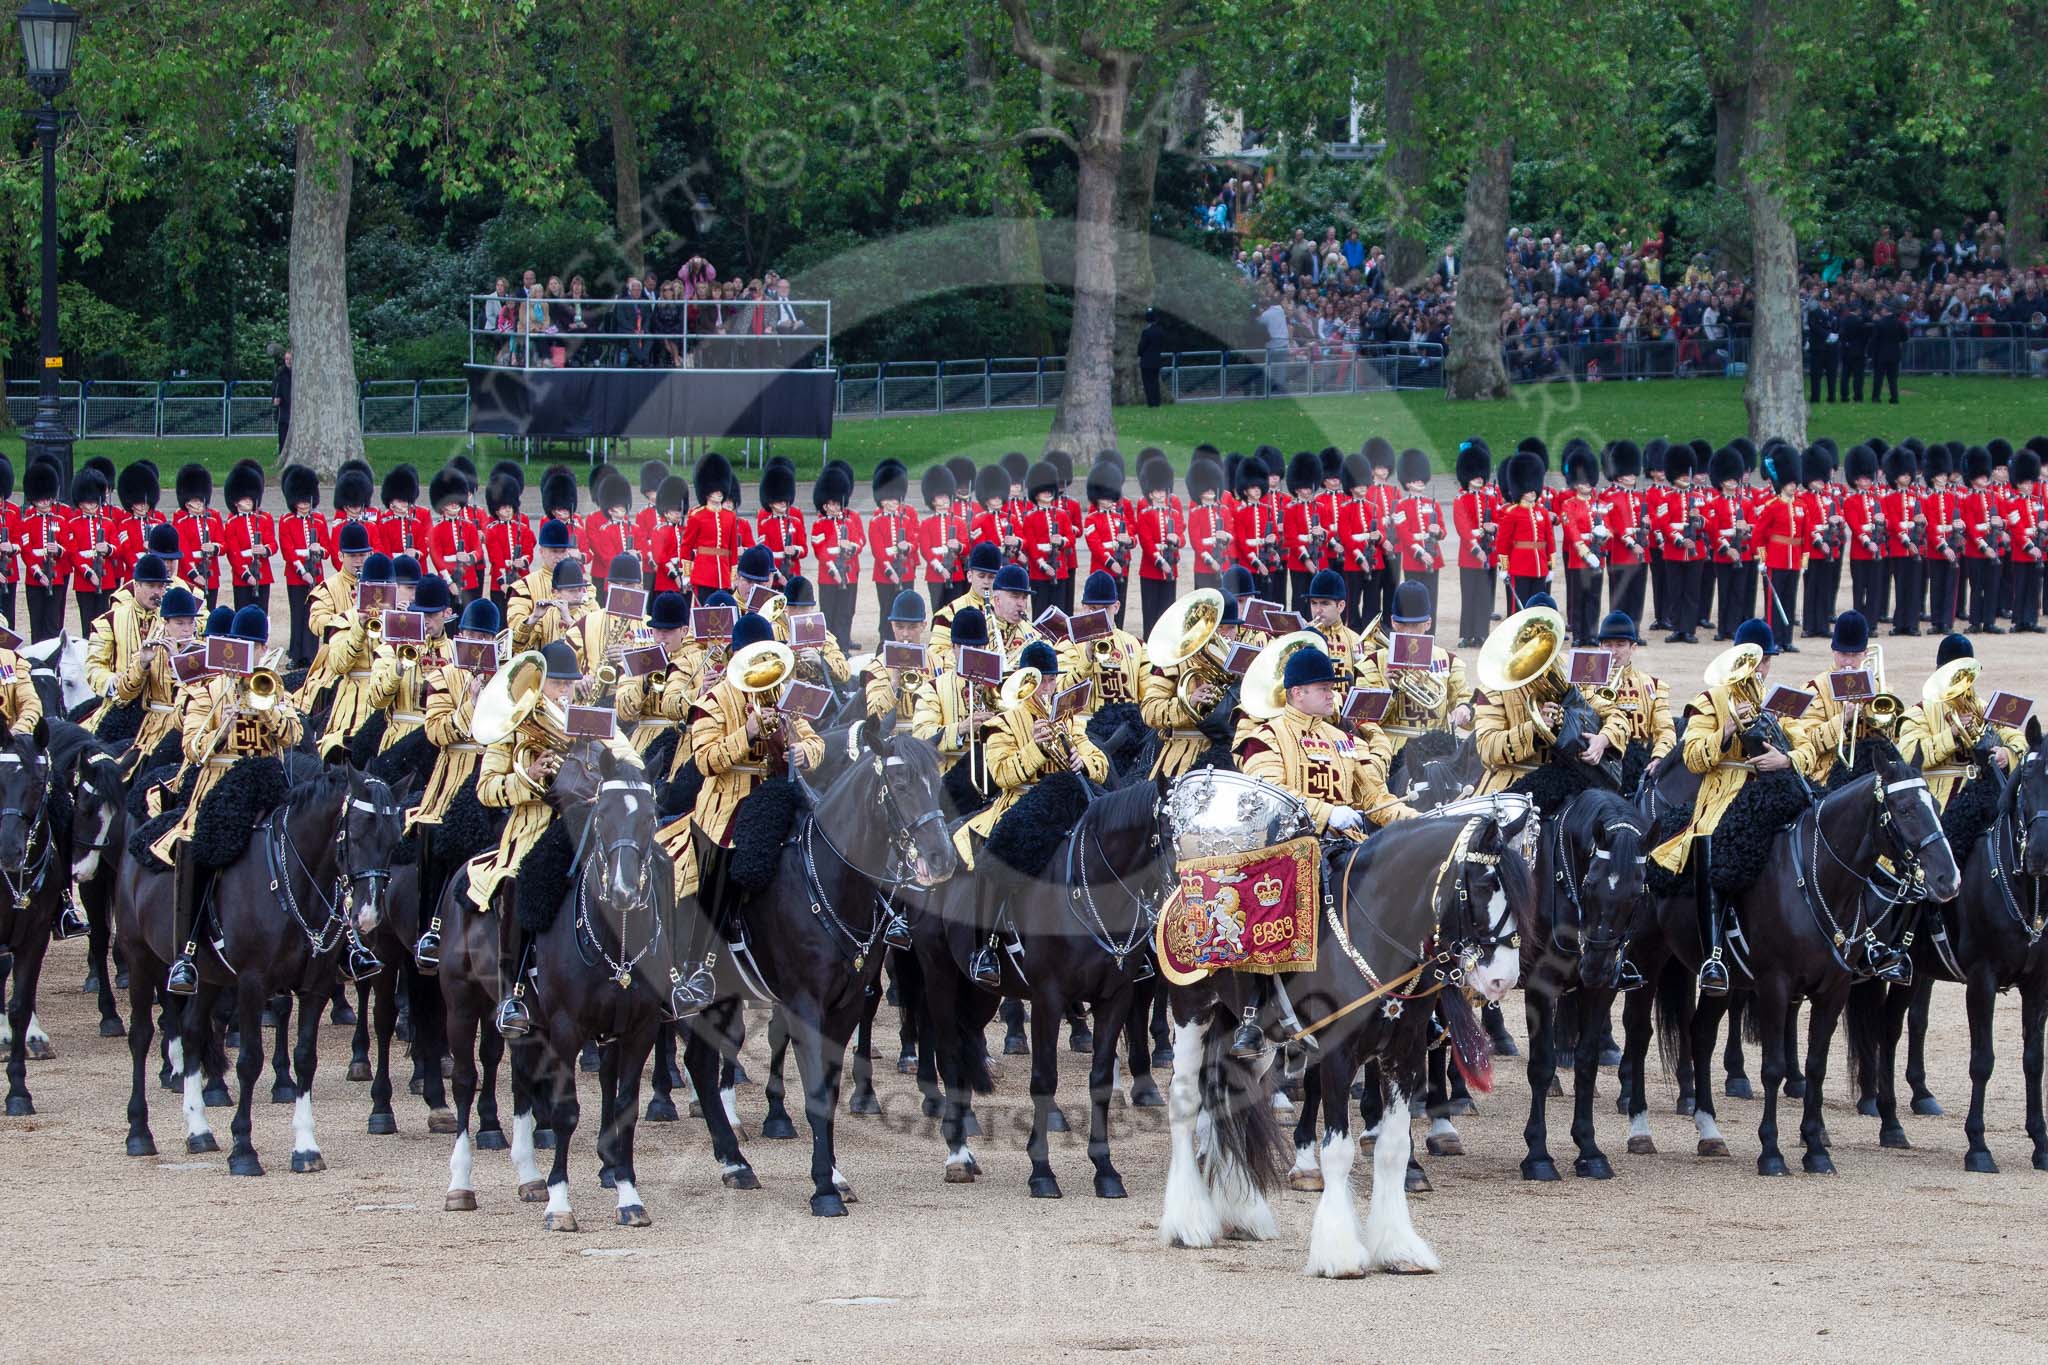 Trooping the Colour 2012: The Ride Past - the Mounted Bands of the Household Cavalry..
Horse Guards Parade, Westminster,
London SW1,

United Kingdom,
on 16 June 2012 at 11:54, image #540